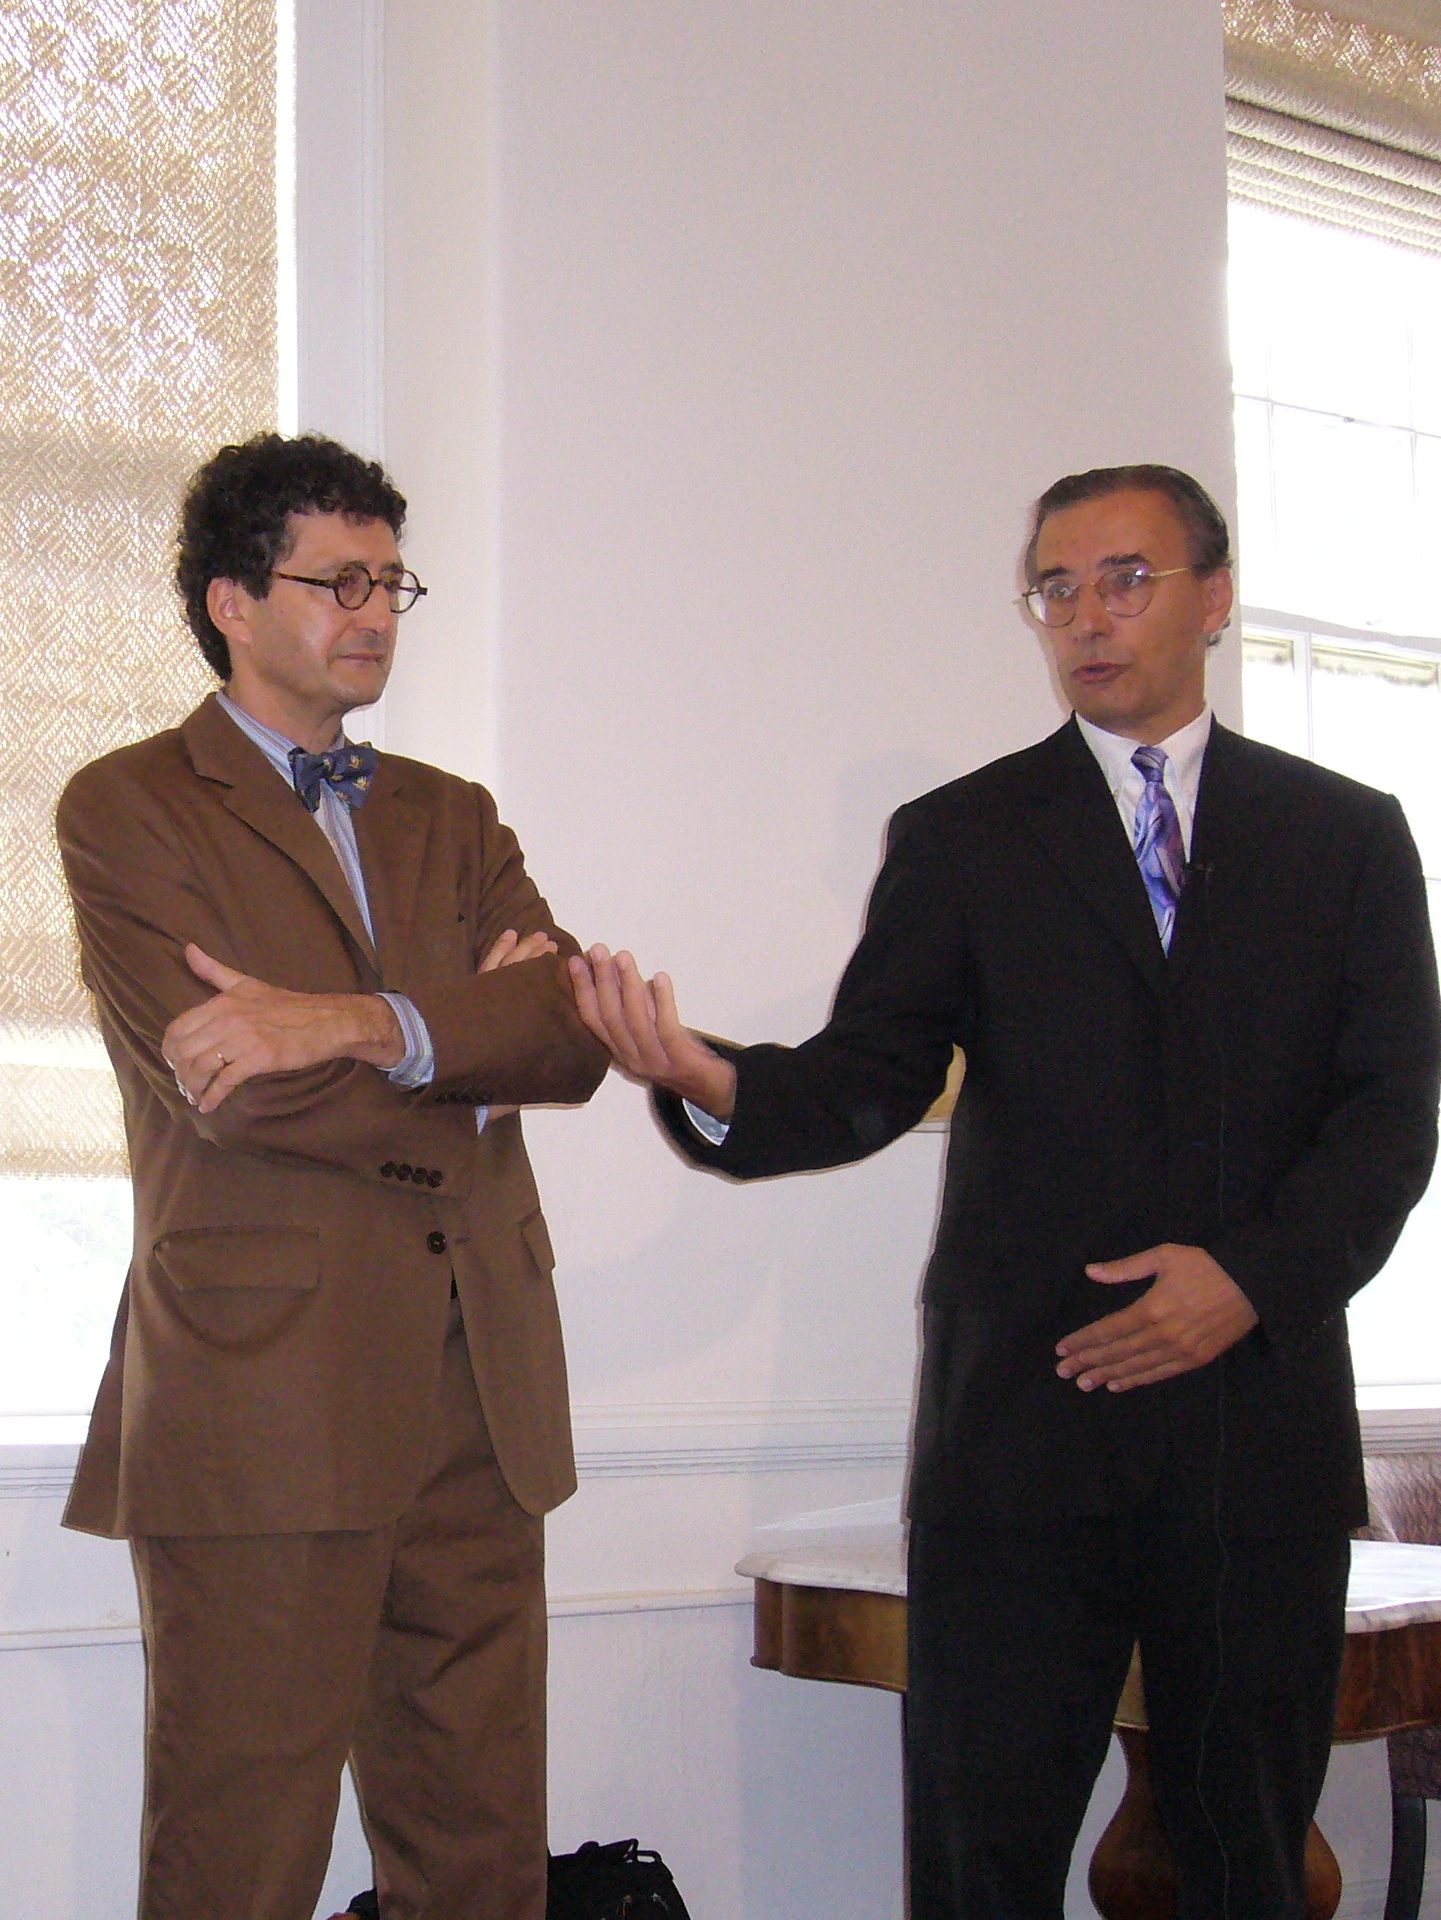 Dr. Alain Saint-Saens with Consul Gnral of France in New Orleans.